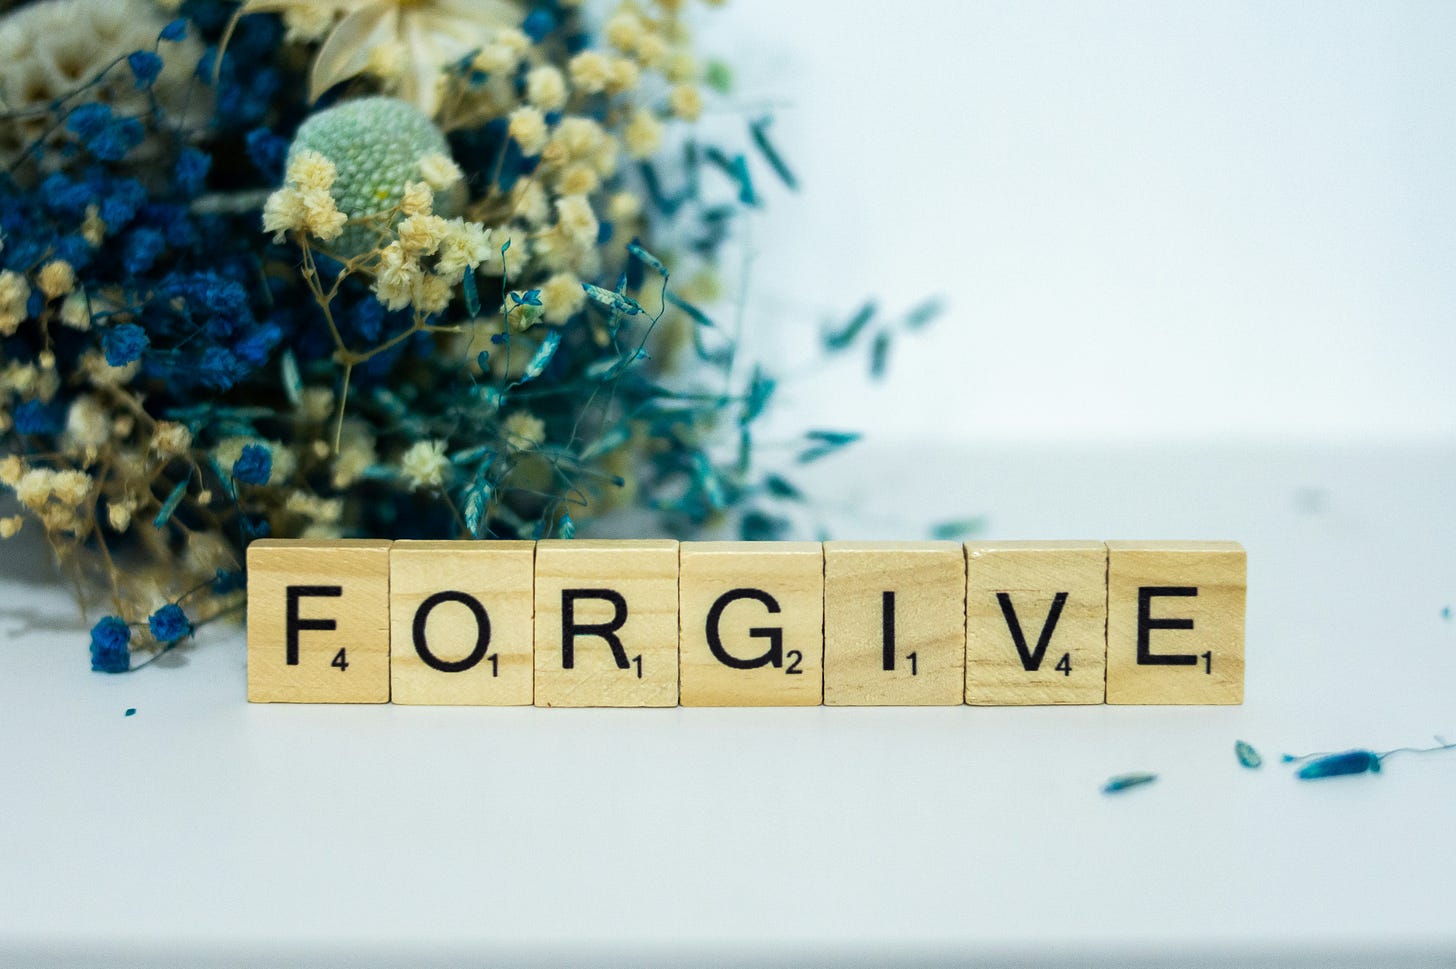 A pale background with blue, tan, and green dried flowers on the left with wooden Scrabble letters in the middle spelling out "FORGIVE"